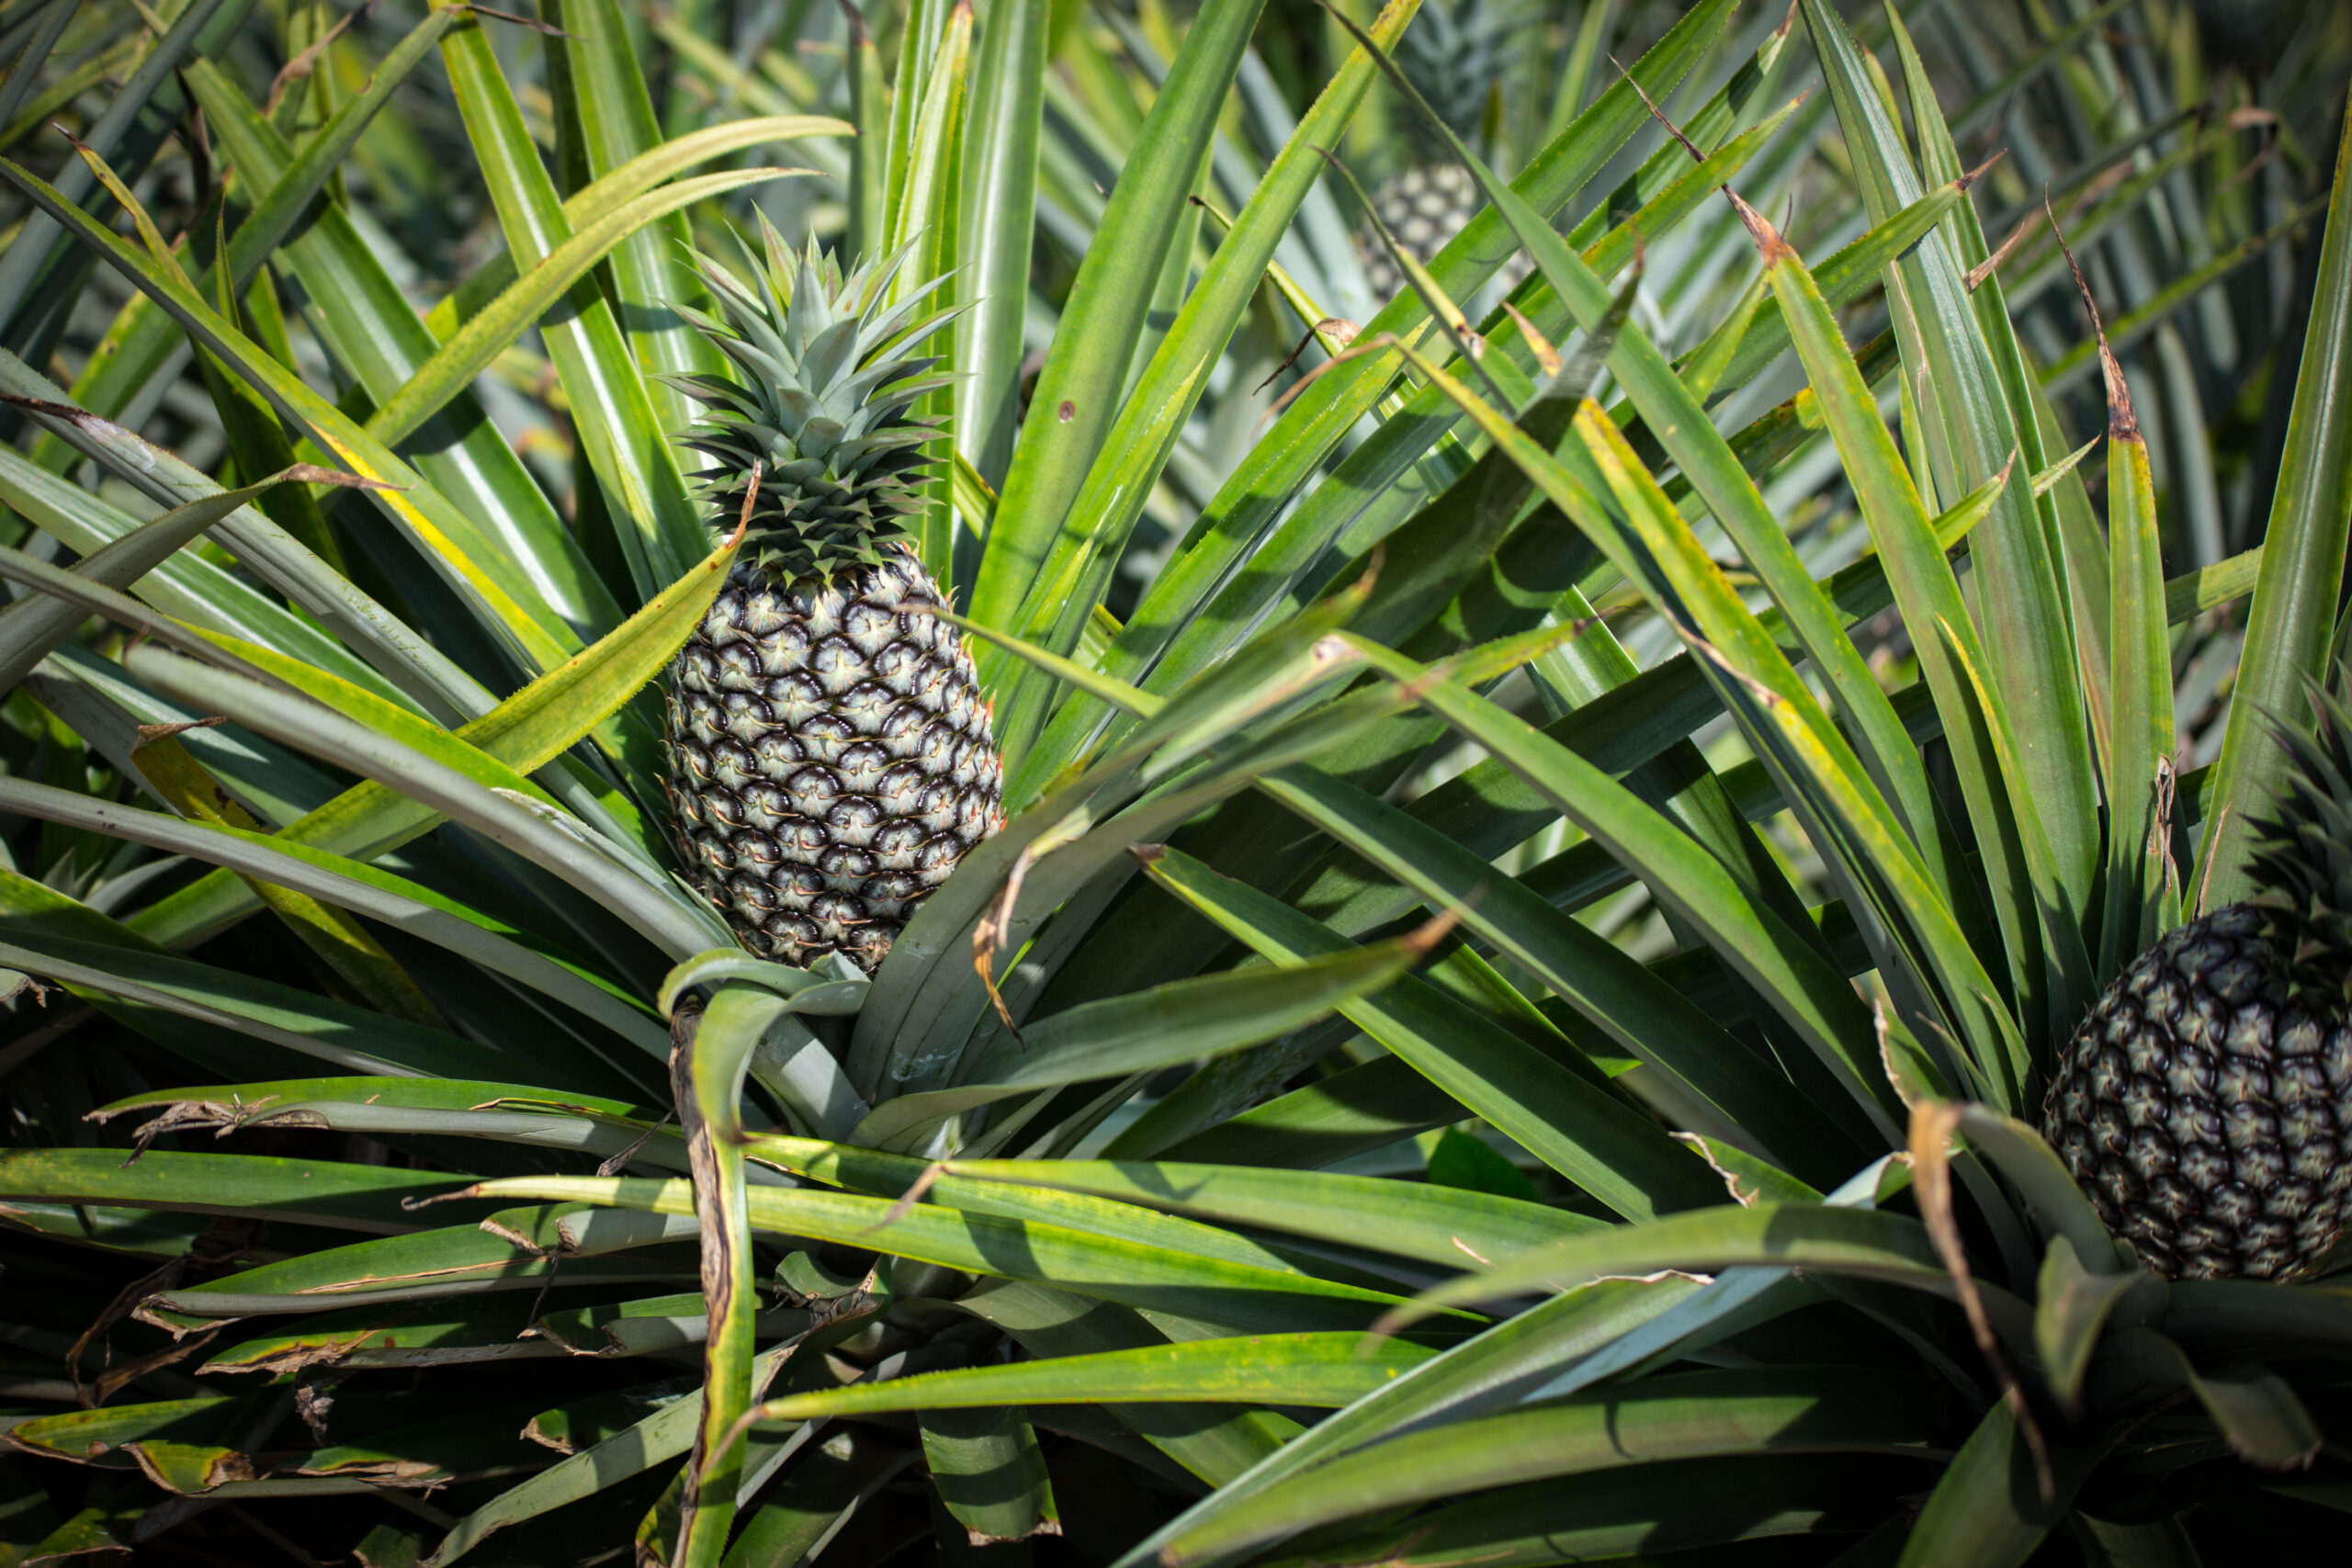 Close-up of a pineapple growing in the field in Benin.